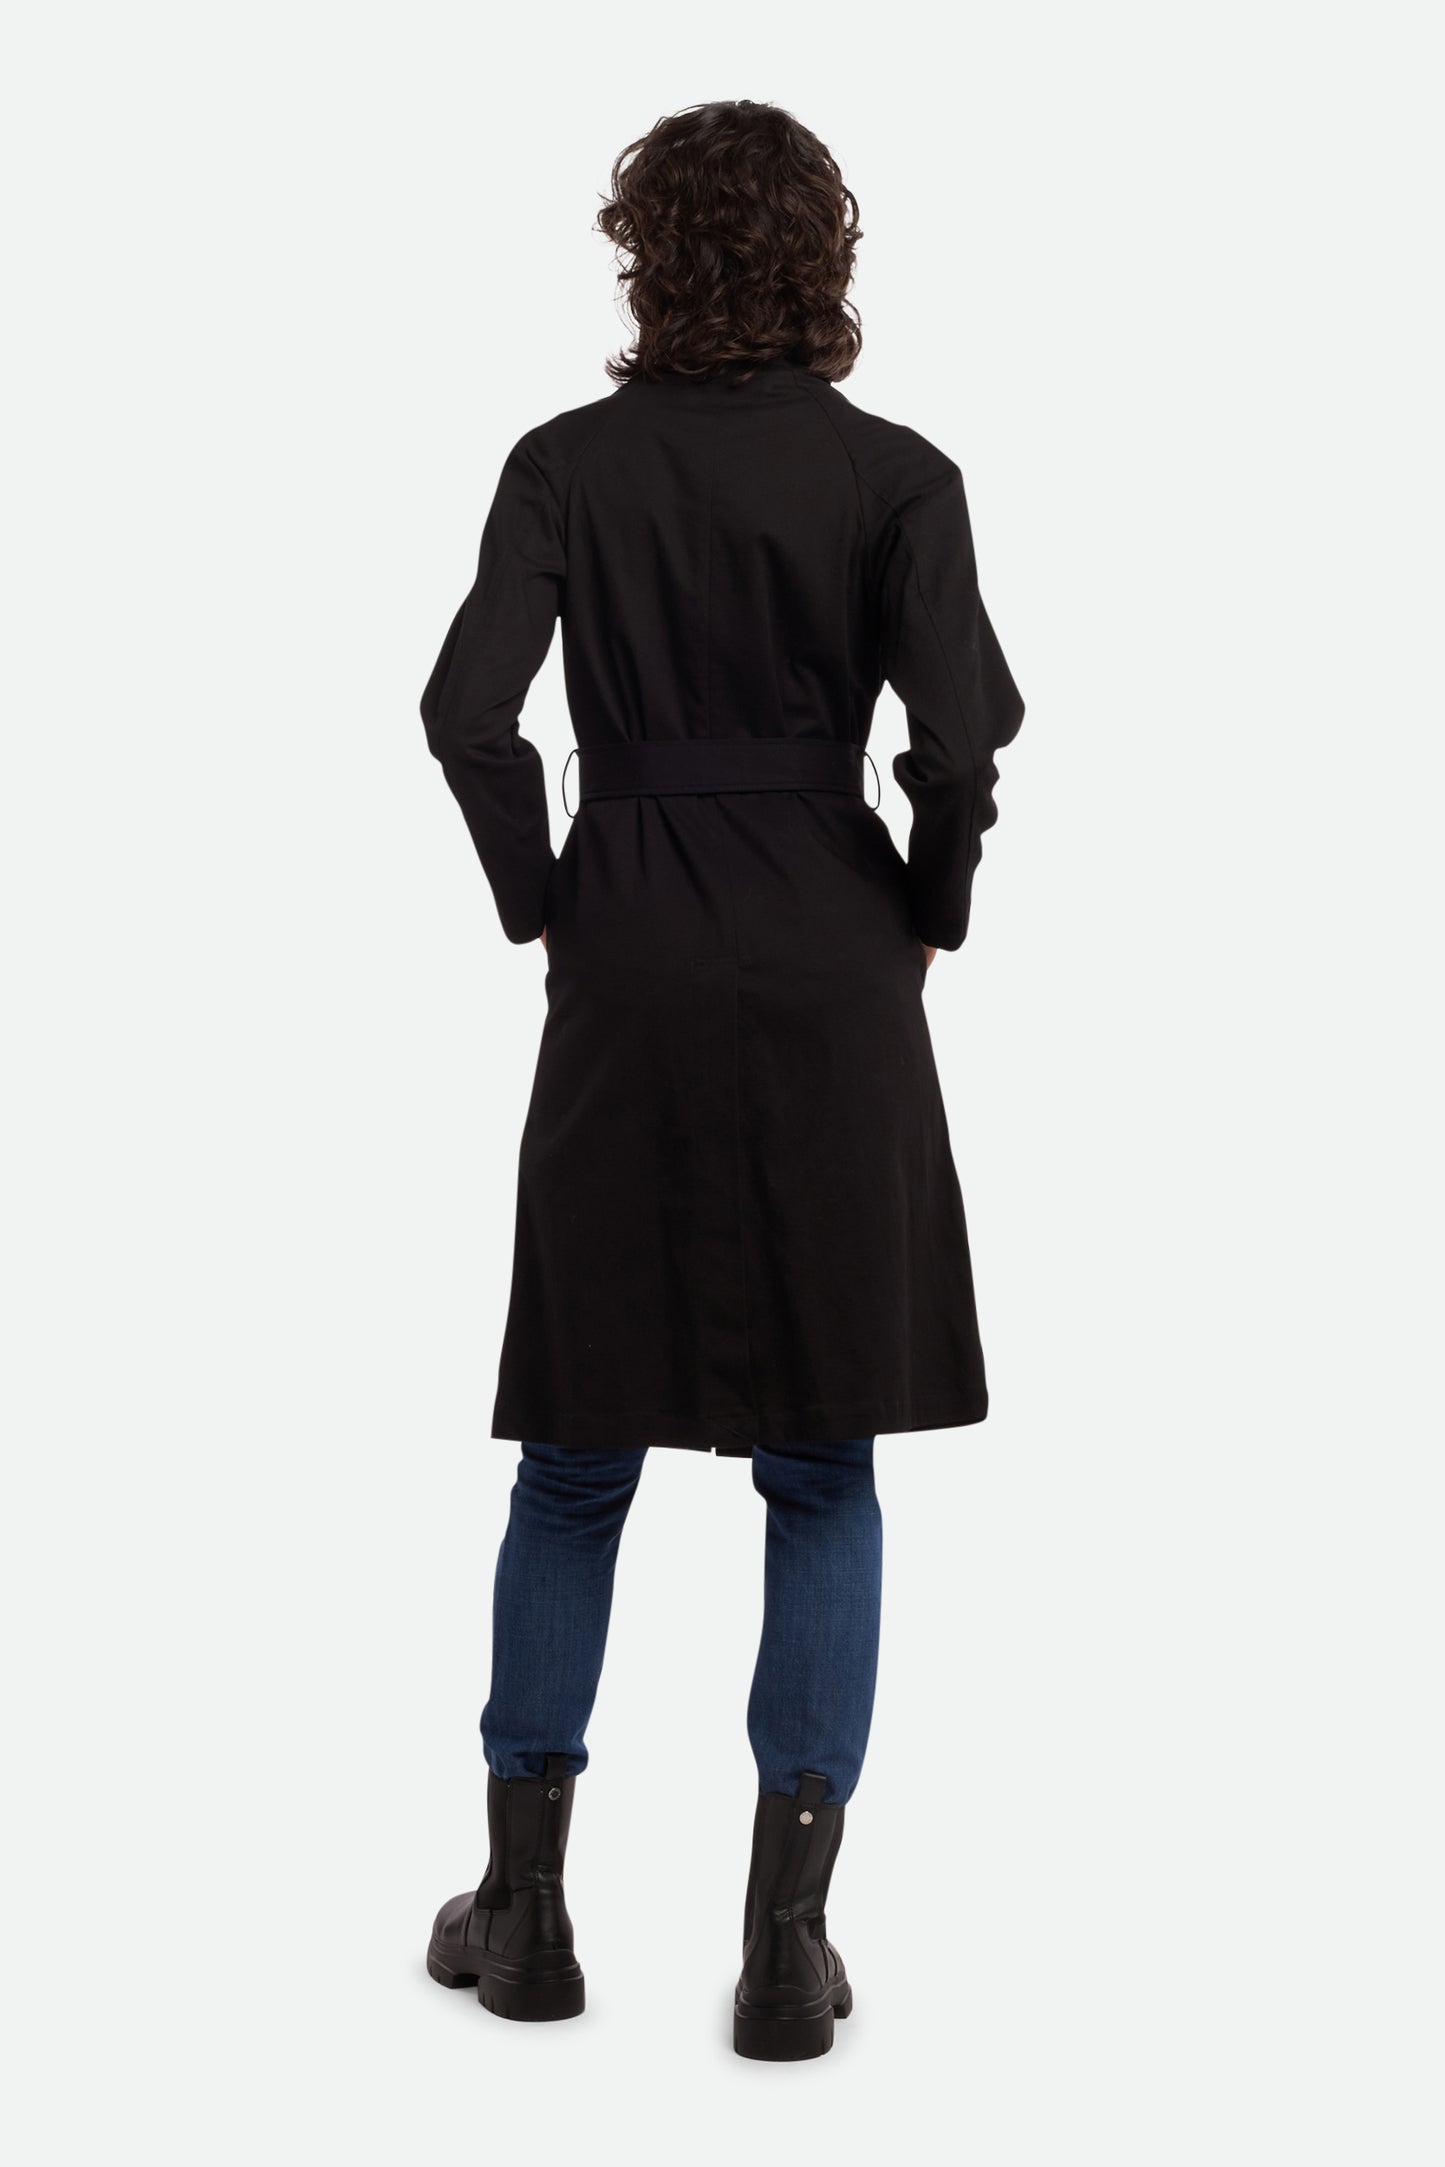 Twinset Black Trench